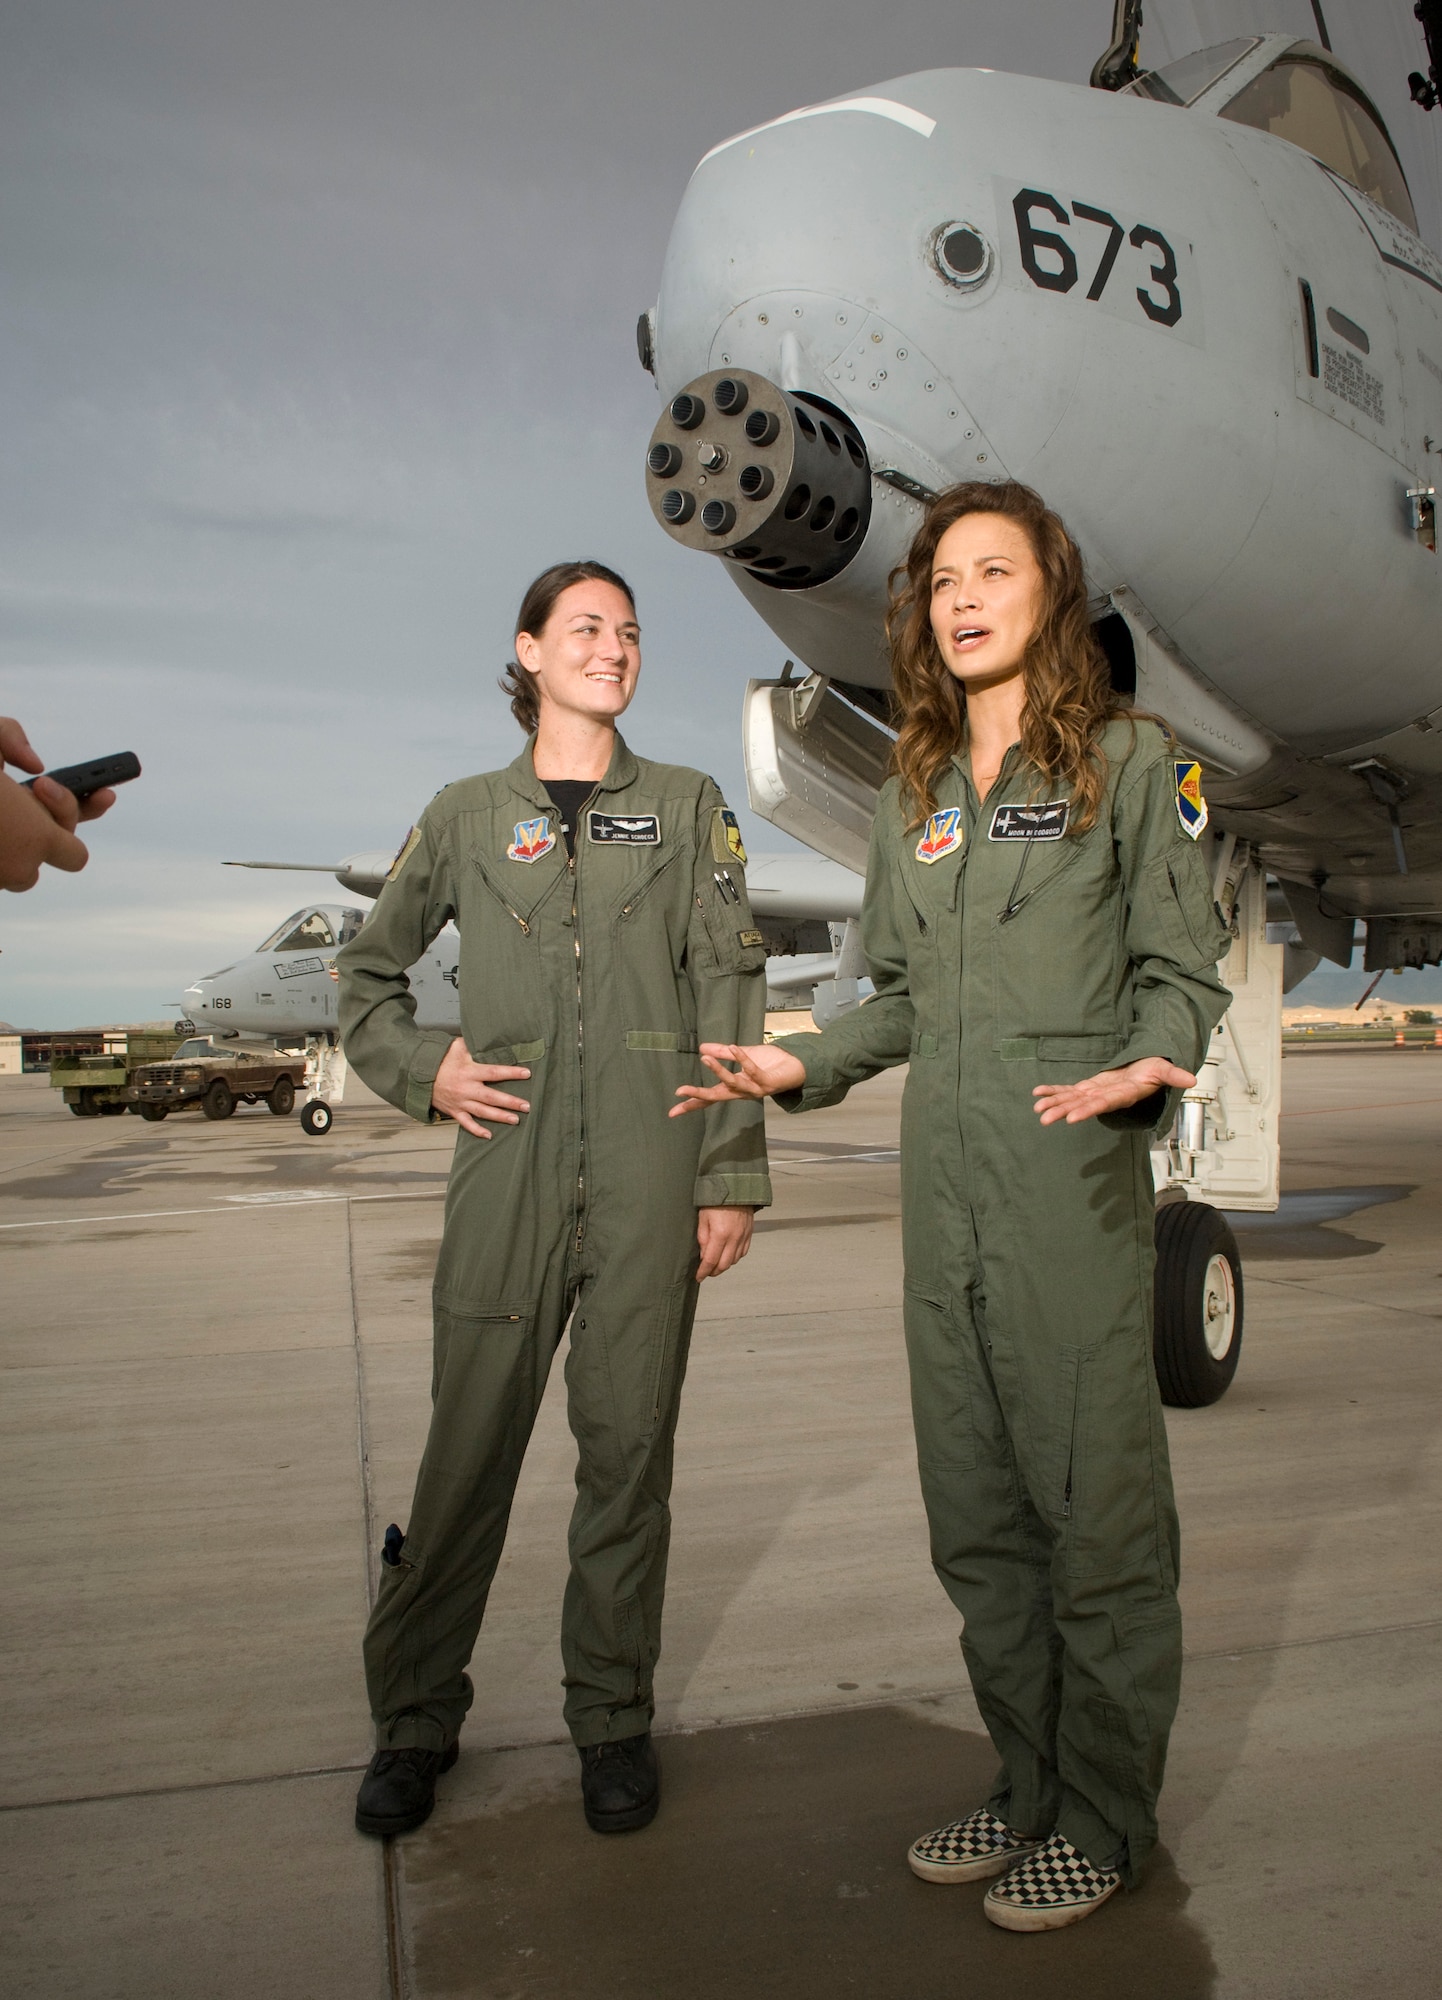 Capt. Jennie Schoeck and actress Moon Bloodgood met in front of an  A-10 fighter for an interview with the news media, during the production of Terminator Salvation at Kirtland Air Force Base, NM on July 18, 2008.  Capt. Schoeck is assigned to the 358 Fighter Squadron, Davis-Monthan Air Force Base, AZ was the A-10 fighter advisor for the production. Moon Bloodgood portrays a lead resistance pilot in the movie. The 358th Fighter Squadron is the Air Force's only active-duty A/OA-10A formal training unit the 358th FS conducts all formal course directed aircraft transition, day/night weapons and tactics employment, day/night air refueling, air combat and dissimilar air combat maneuver training for pilot initial qualification, requalification and instructor qualification in the A-10A for the Combat Air Forces.  (U.S. Air Force photo/Lance Cheung